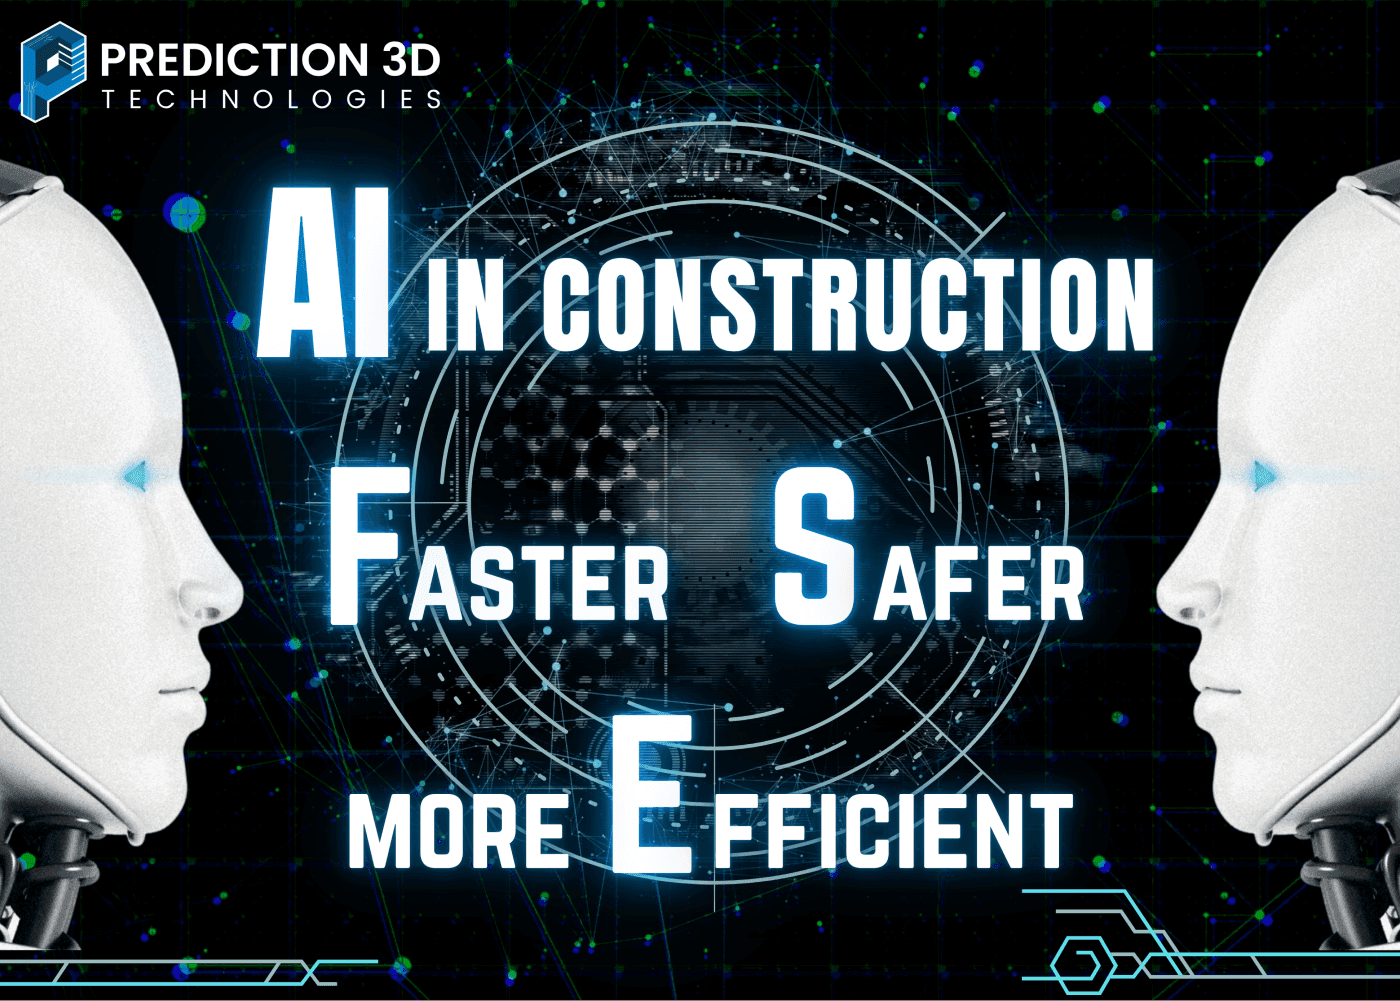 ai in construction: faster, safer, more efficient